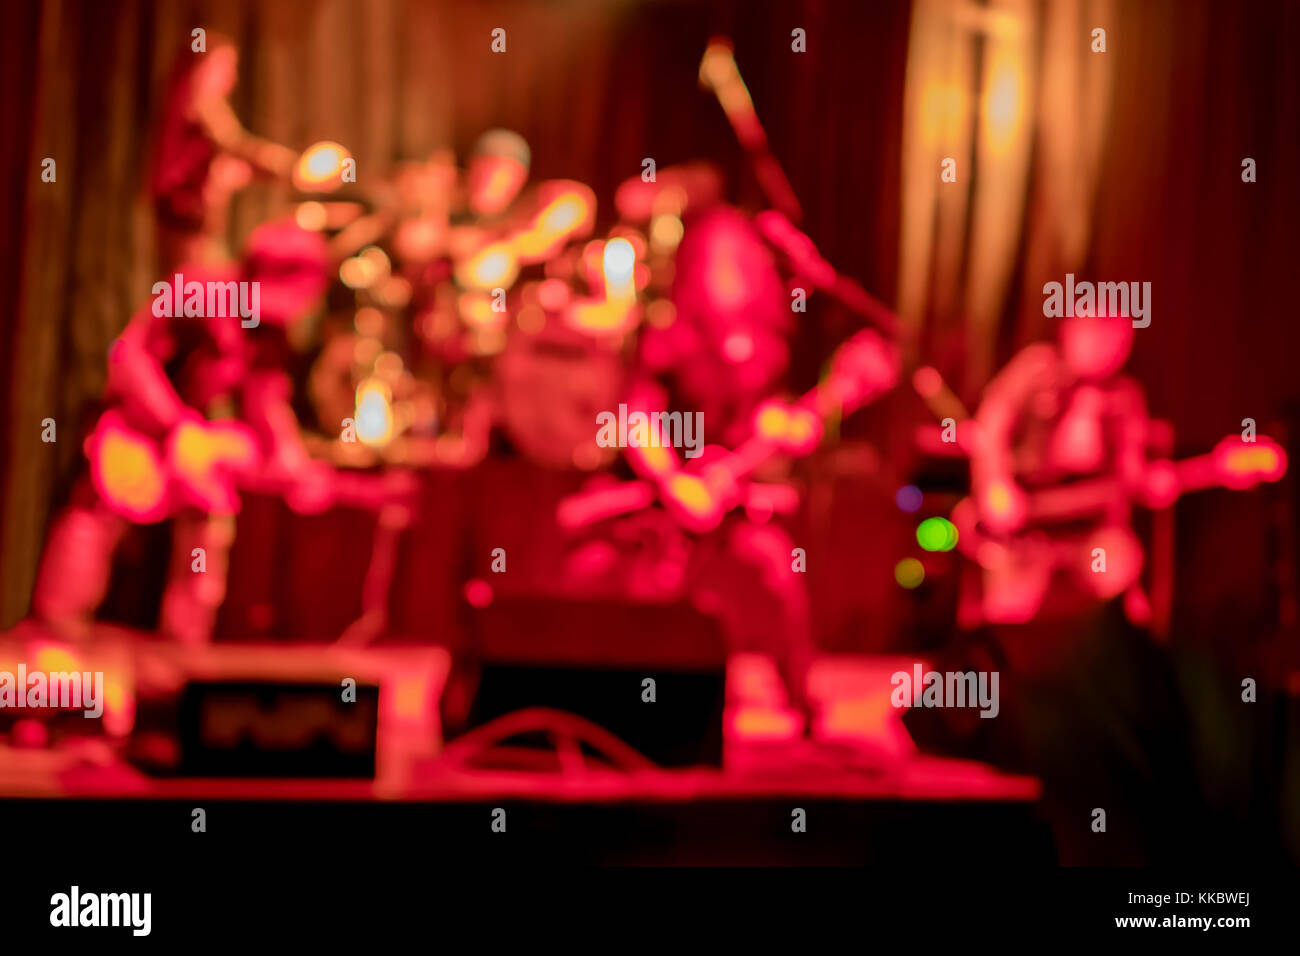 Performance of a rock band with guitarists and a drummer on stage, blurry, in red tones Stock Photo